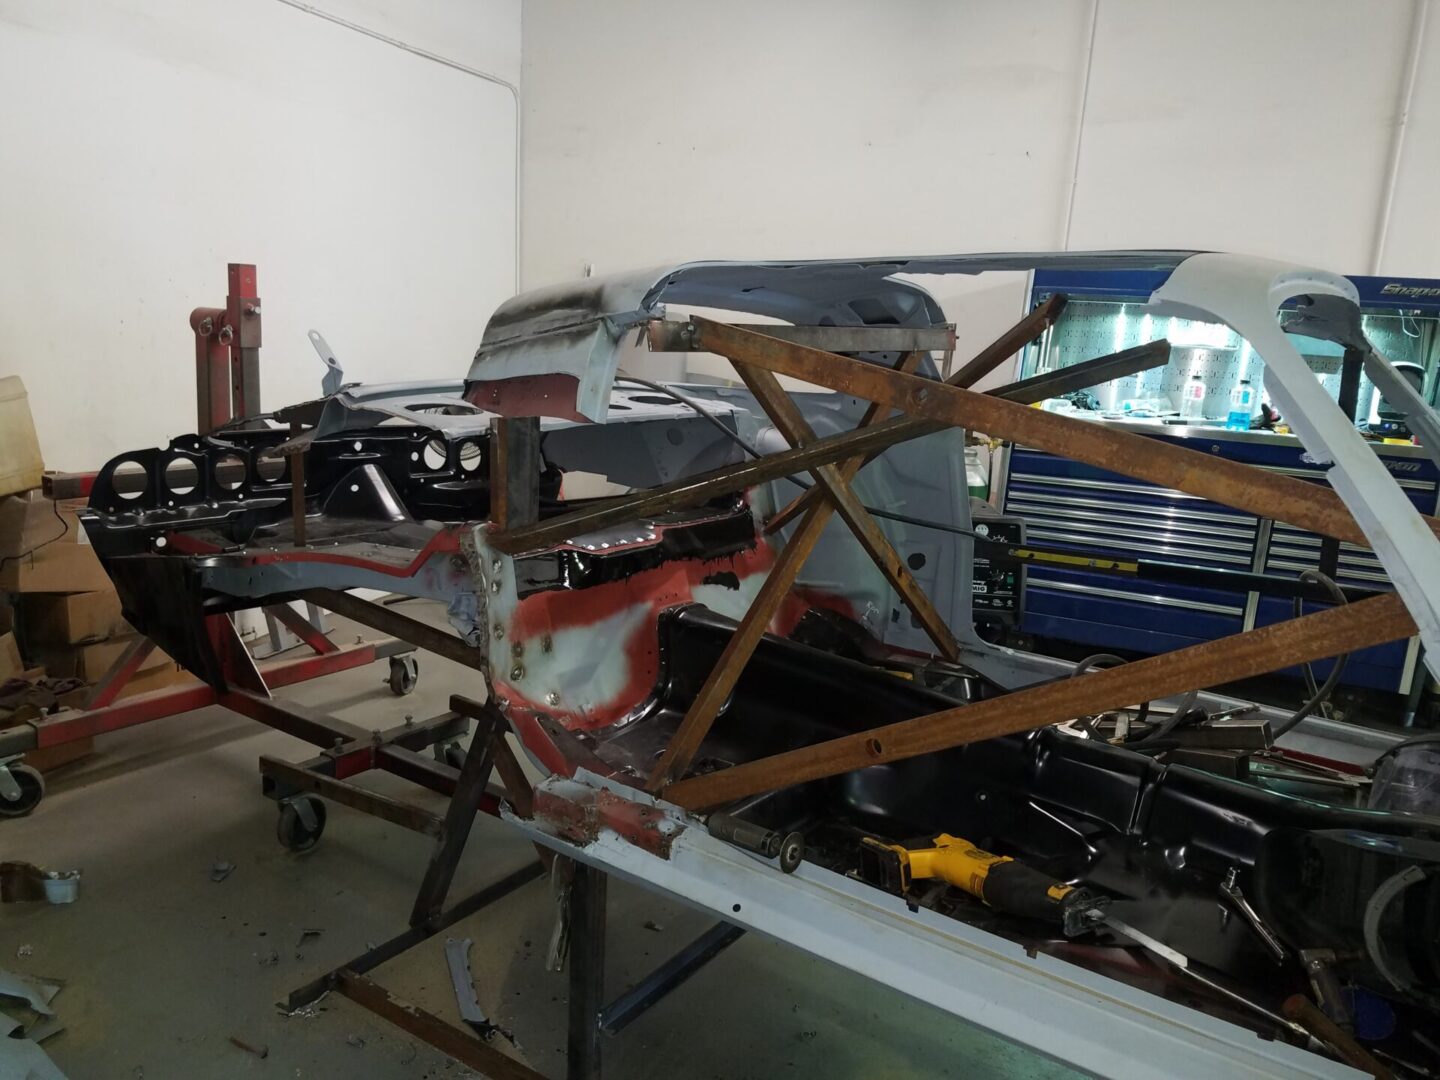 Metal supports for the frame of the car